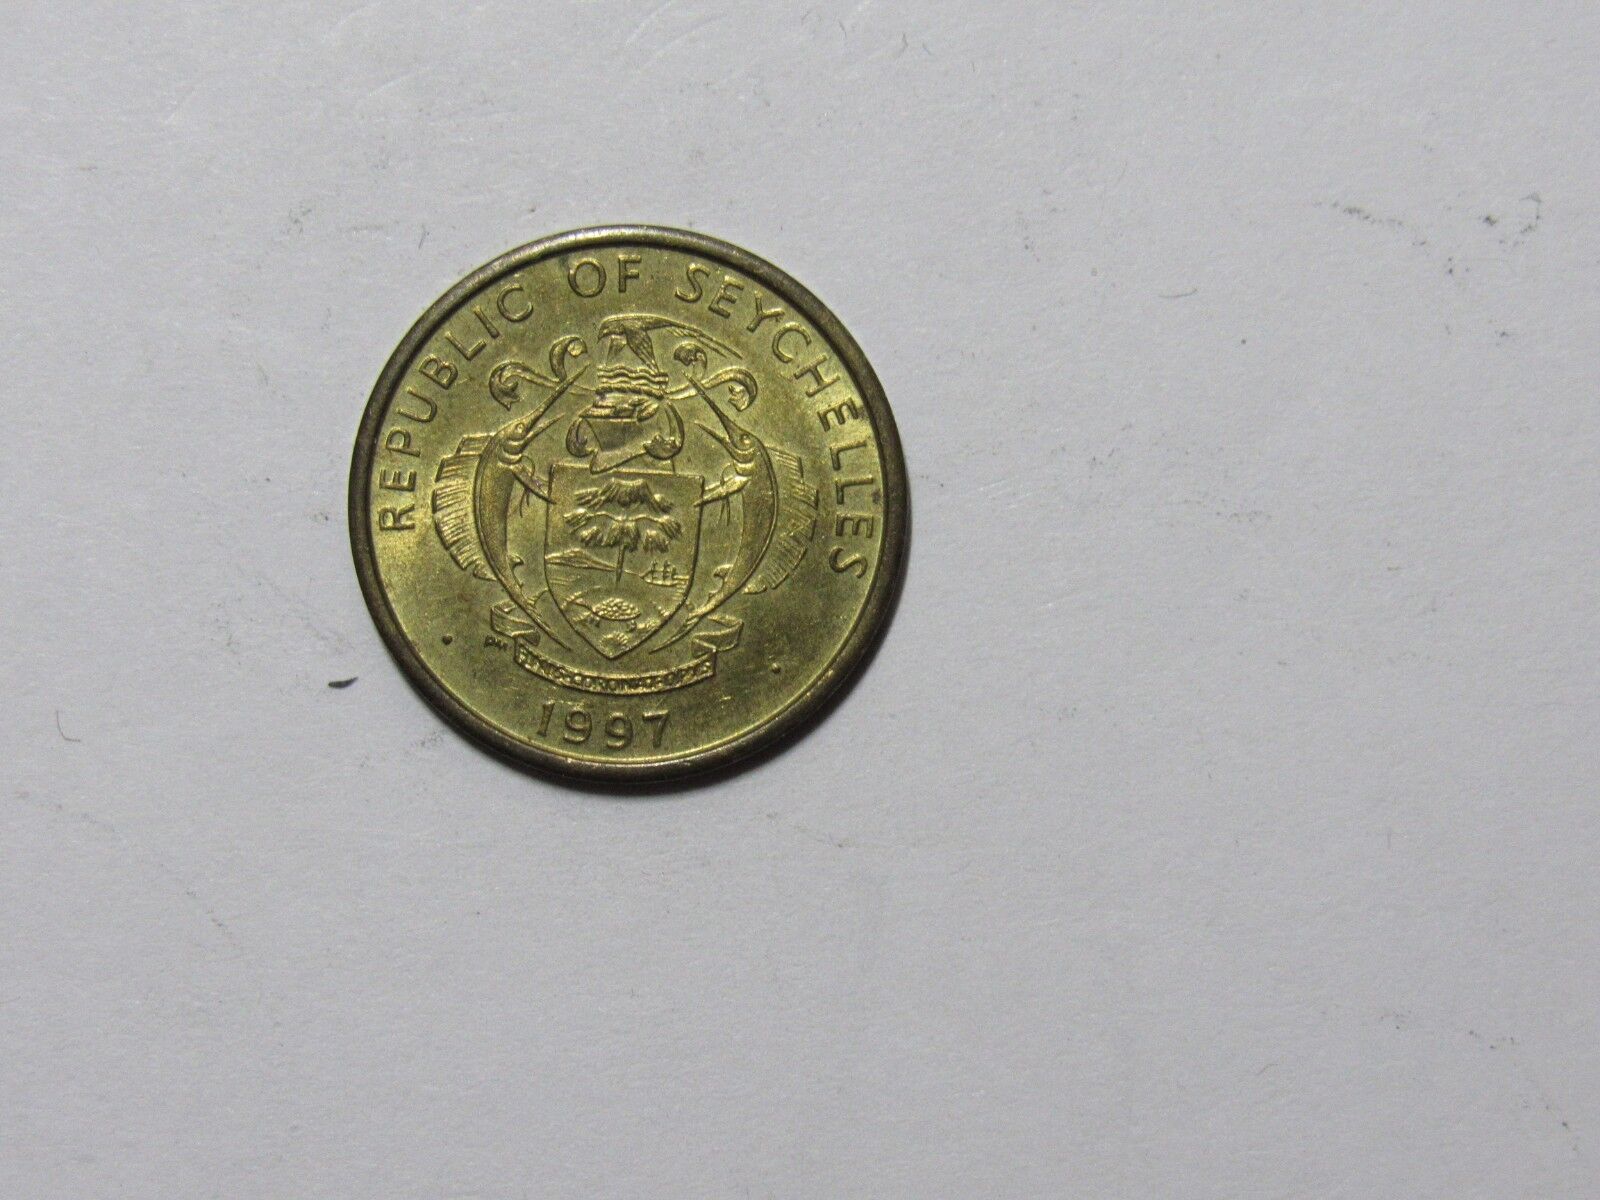 Seychelles Coin - 1997 10 Cents - Circulated